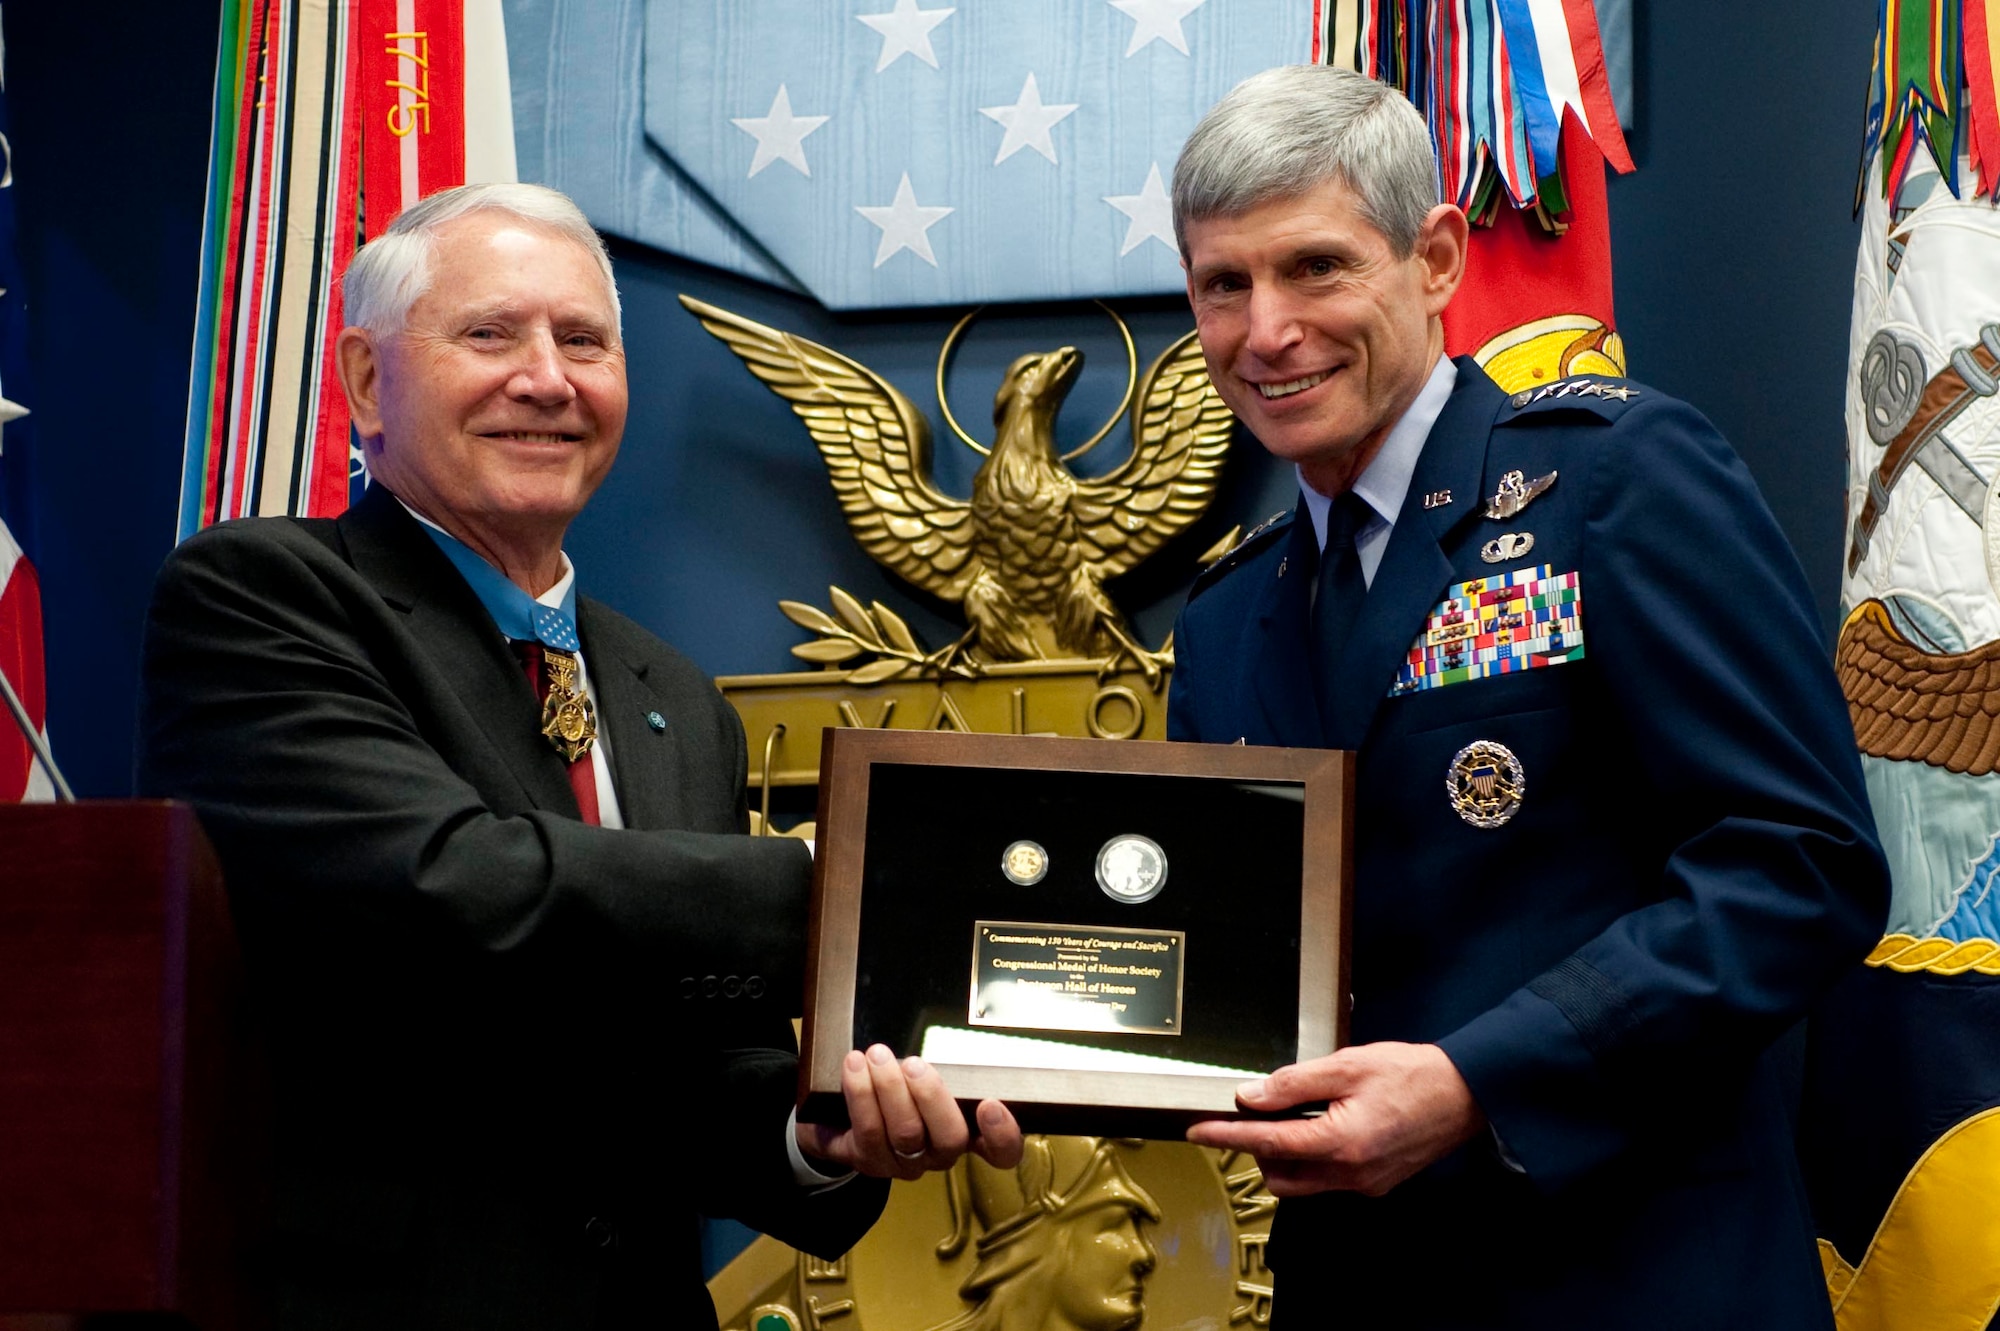 Retired Col. Leo K. Thorsness, president of the Congressional Medal of Honor Society, presents Air Force Chief of Staff Gen. Norton Schwartz with a memorial plaque March 25, 2011, during a ceremony honoring the 150th anniversary of the Medal of Honor in the Hall of Heroes at the Pentagon in Washington, D.C. (Department of Defense photo/Petty Officer 1st Class Chad J. McNeeley)